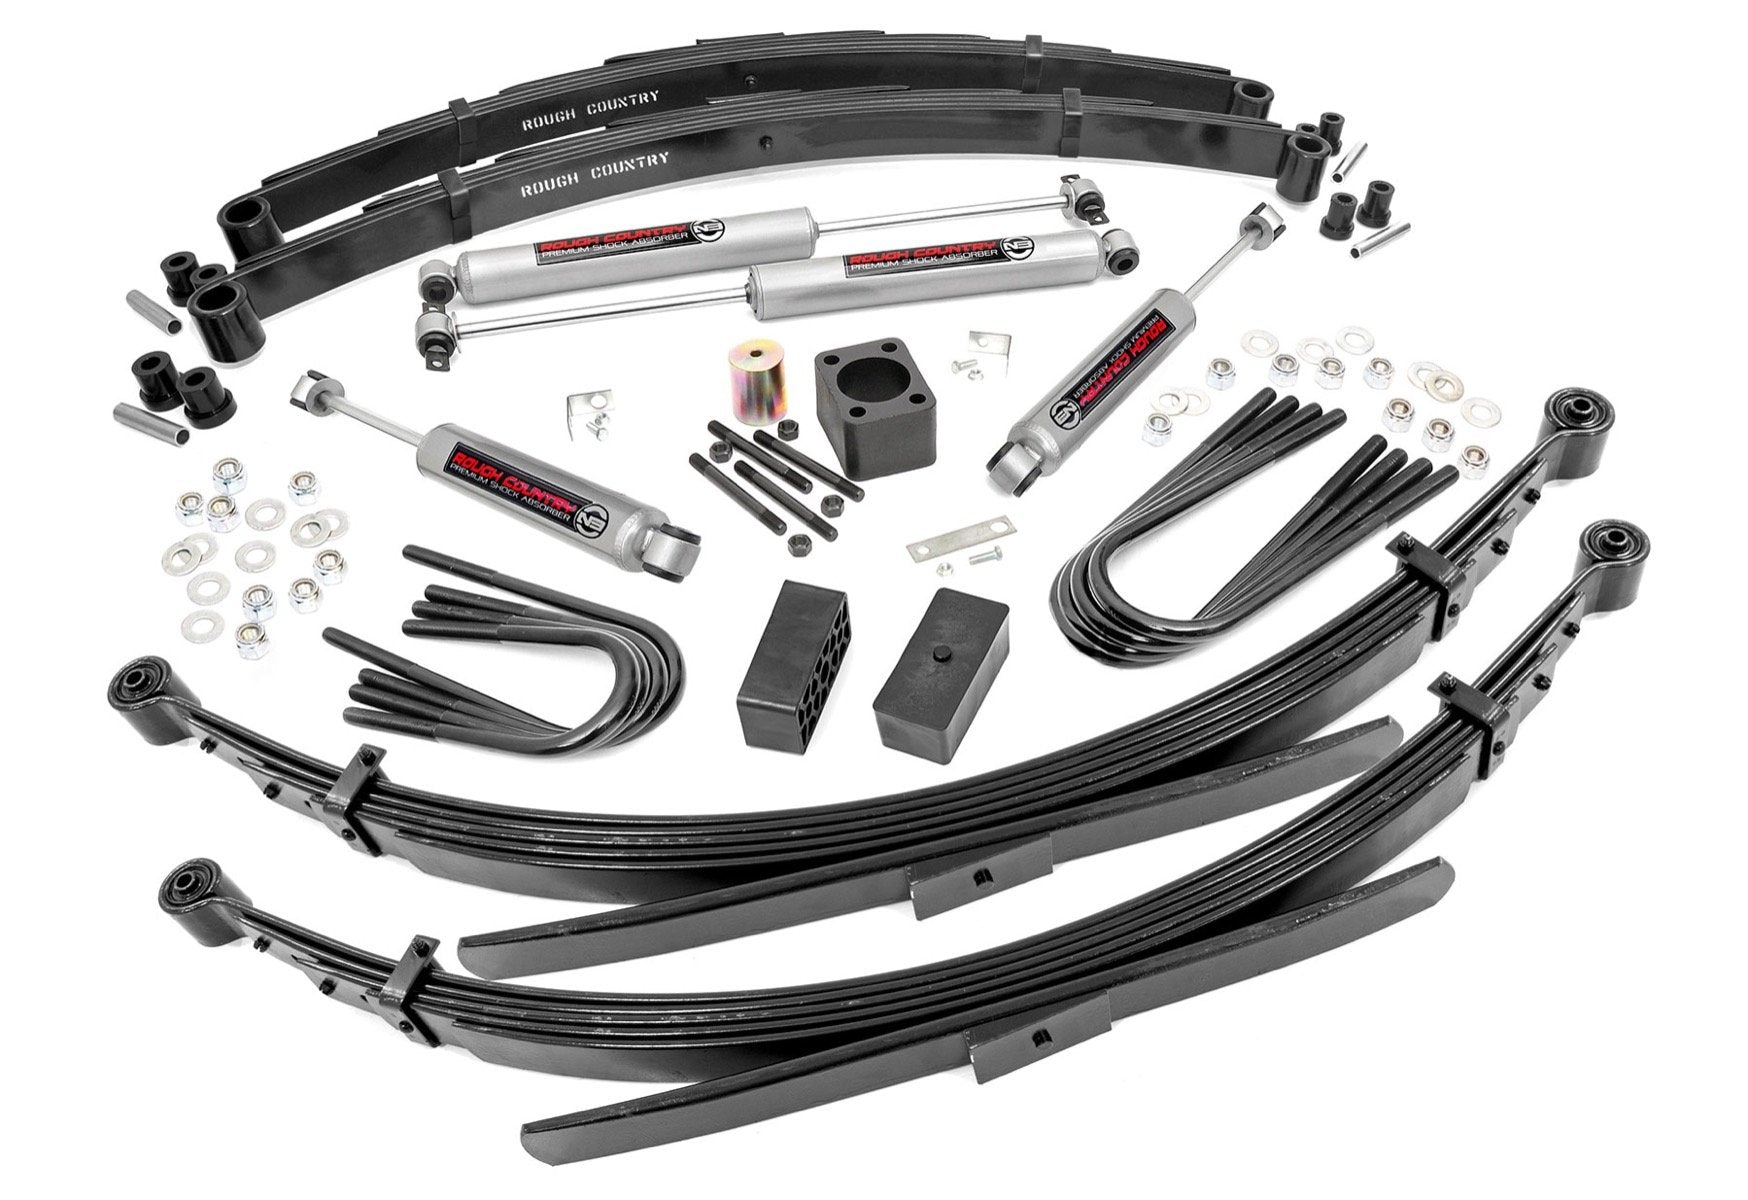 Rough Country (249.20) 6 Inch Lift Kit | Rear Springs | Chevy C3500/K3500 Truck 4WD (1988-1991)